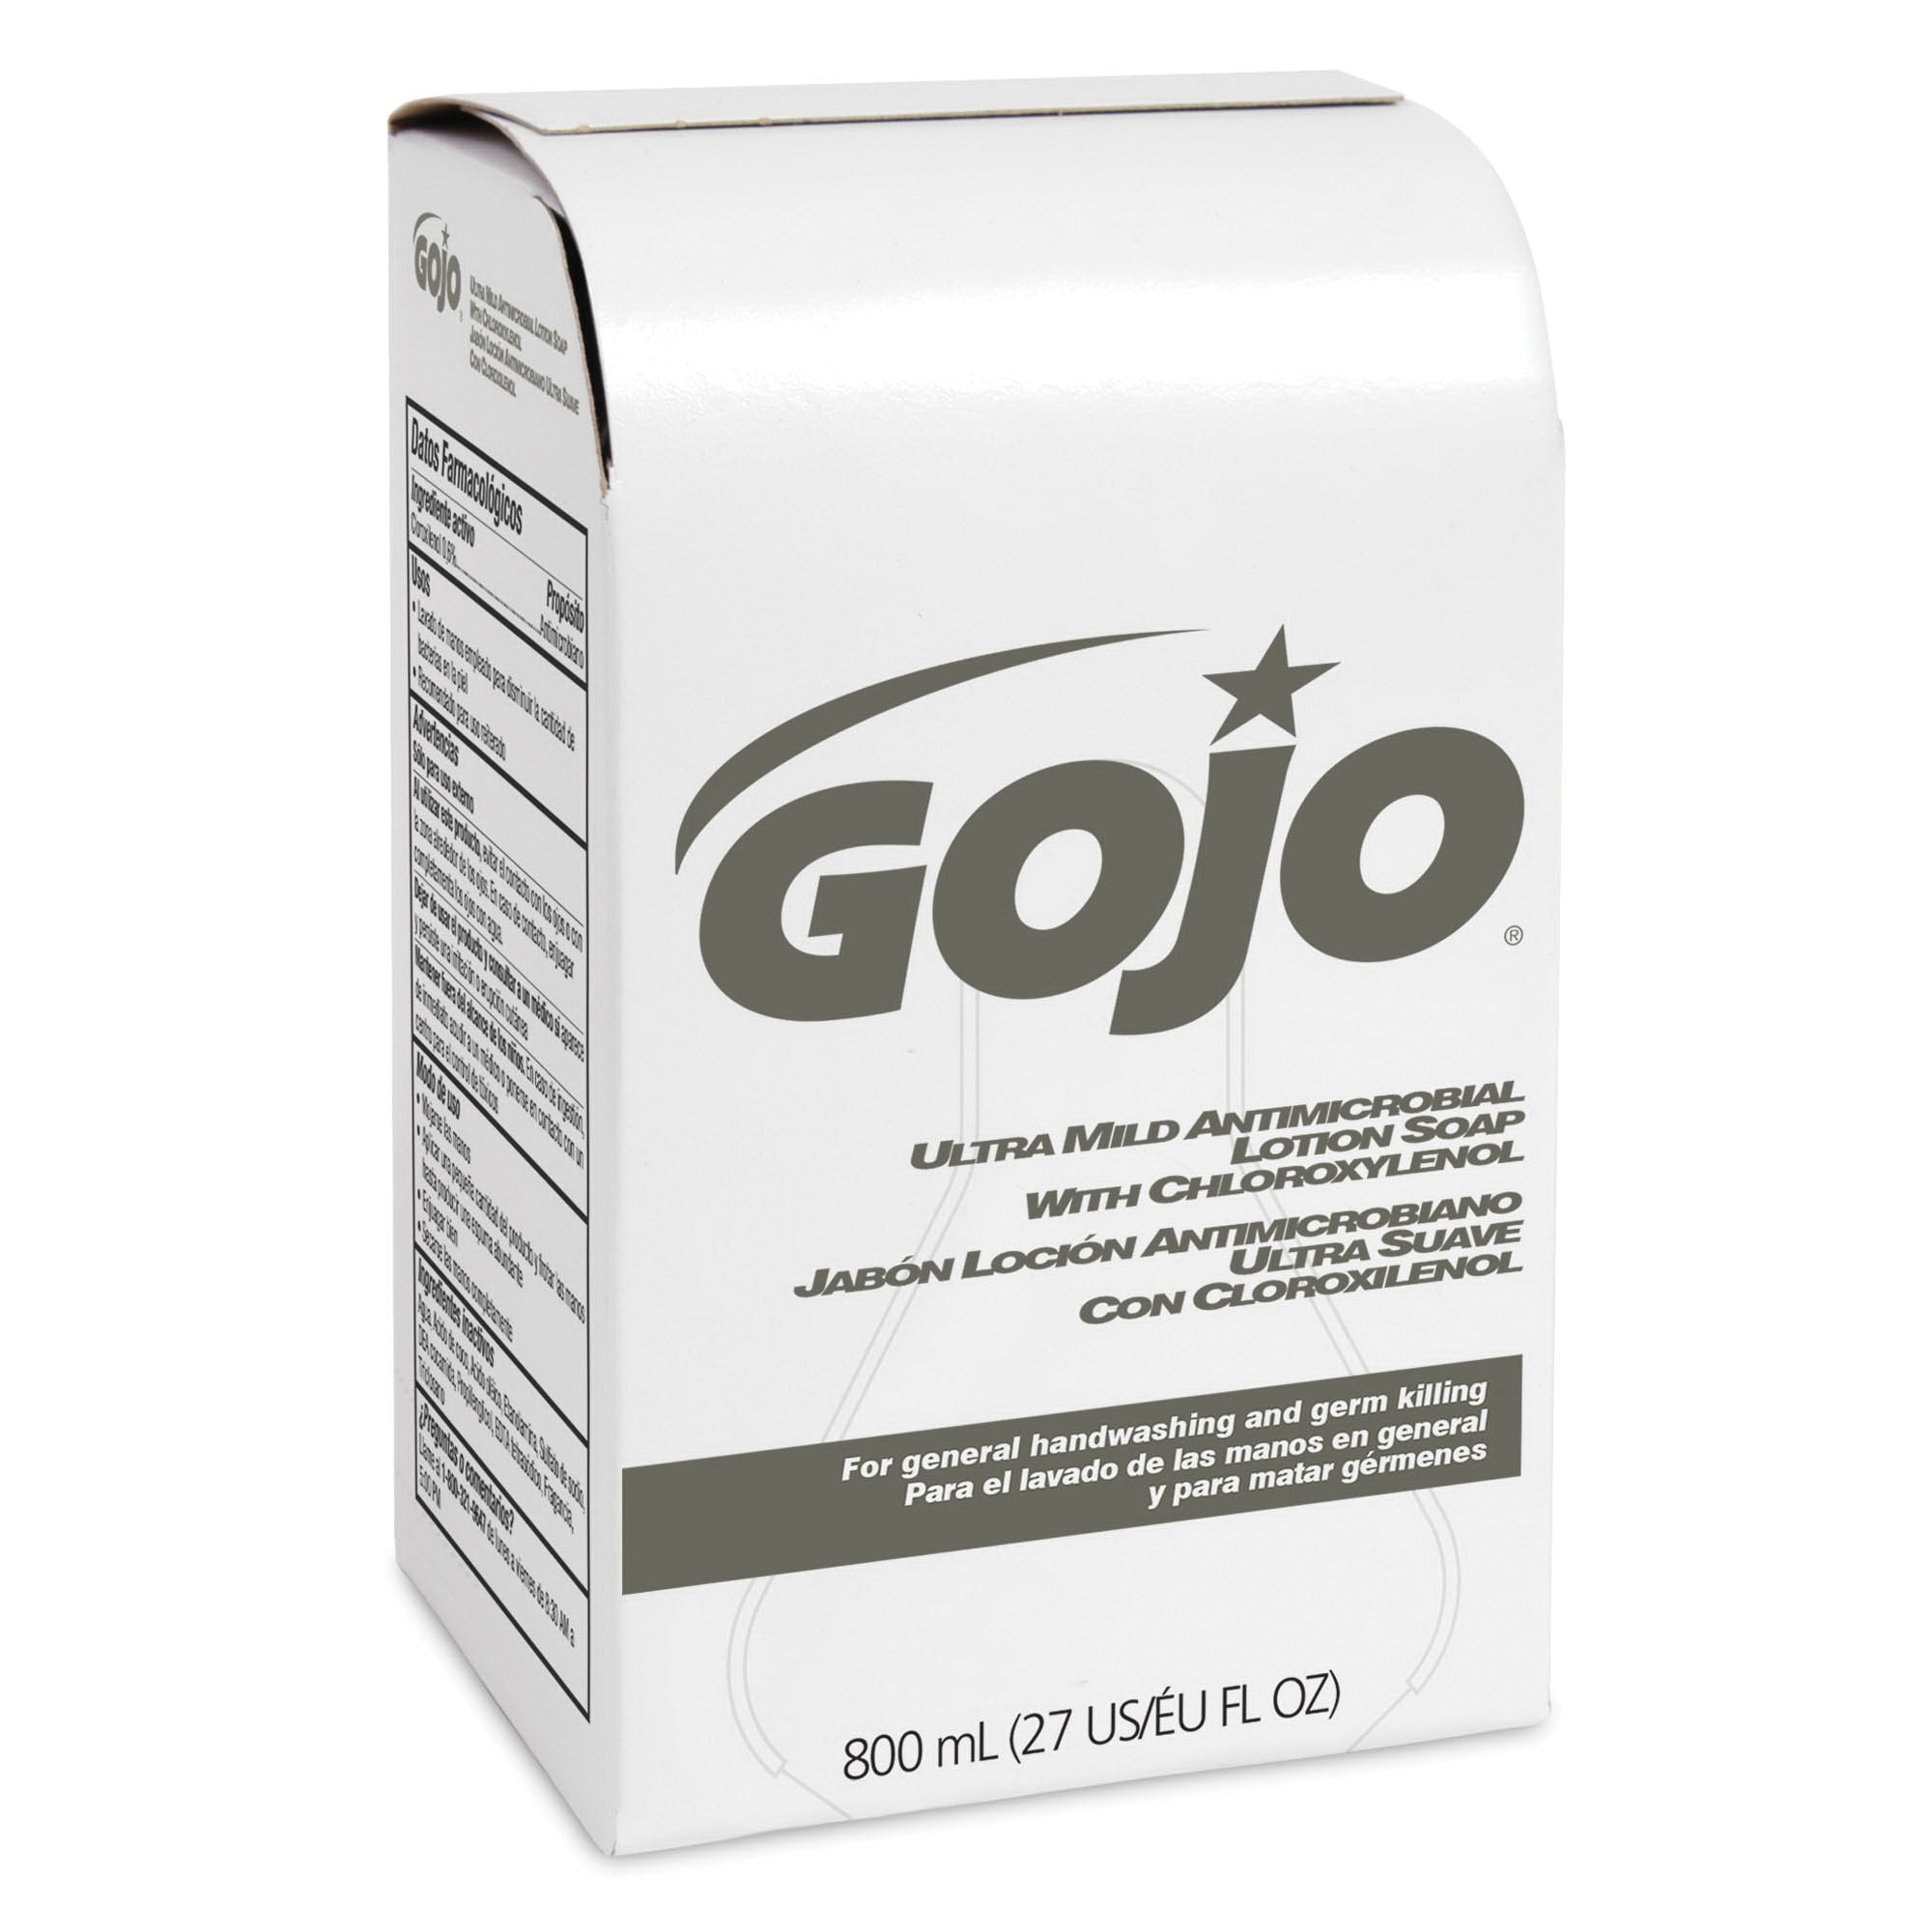 GOJO® 9212-12 Ultra Mild Antimicrobial Lotion Soap, 800 mL Nominal, Dispenser Refill Package, Liquid Form, Floral Odor/Scent, Amber